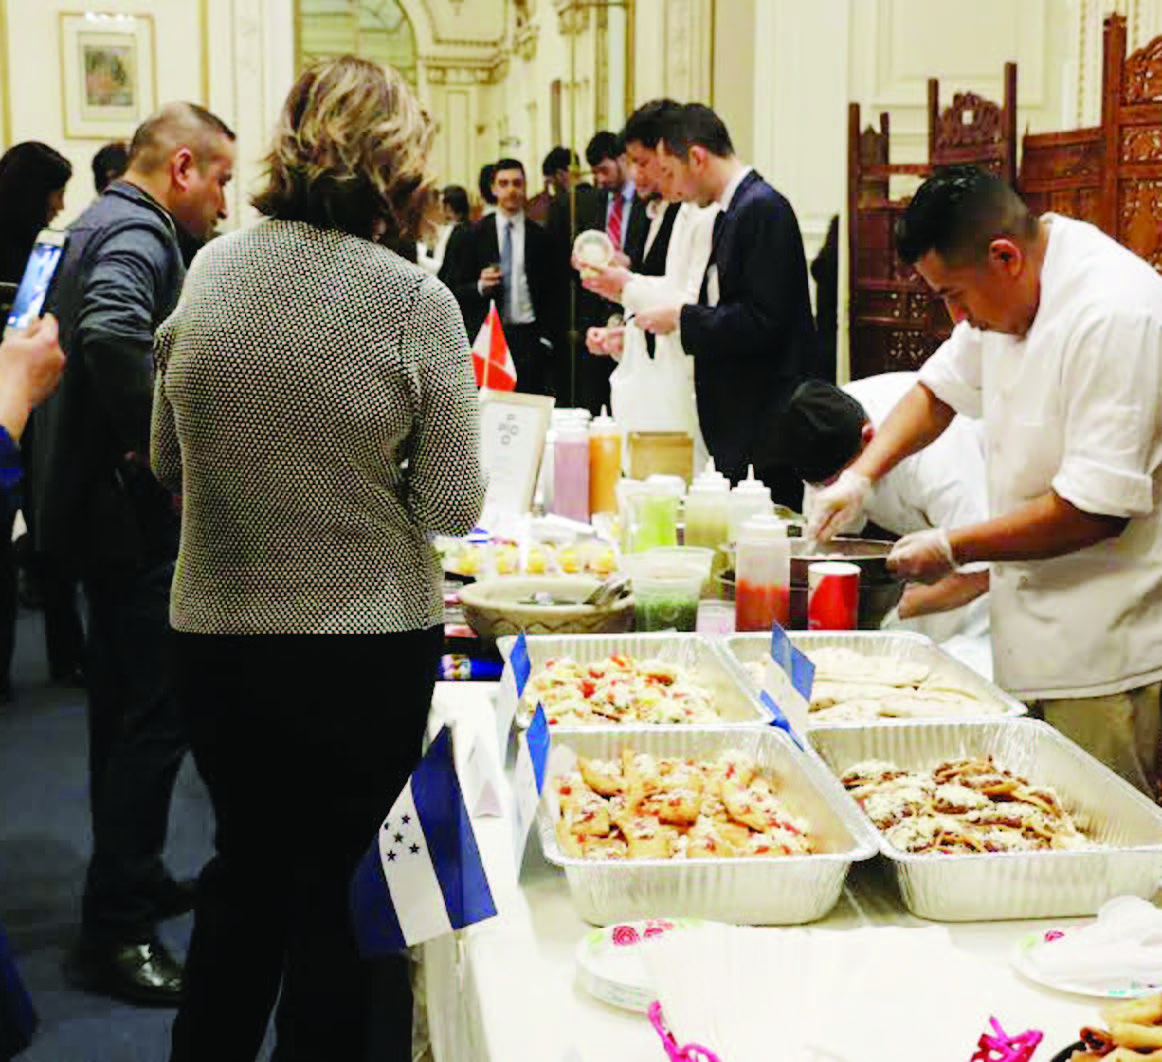 More than 25 countries showcased their rich cuisine and culture during the event